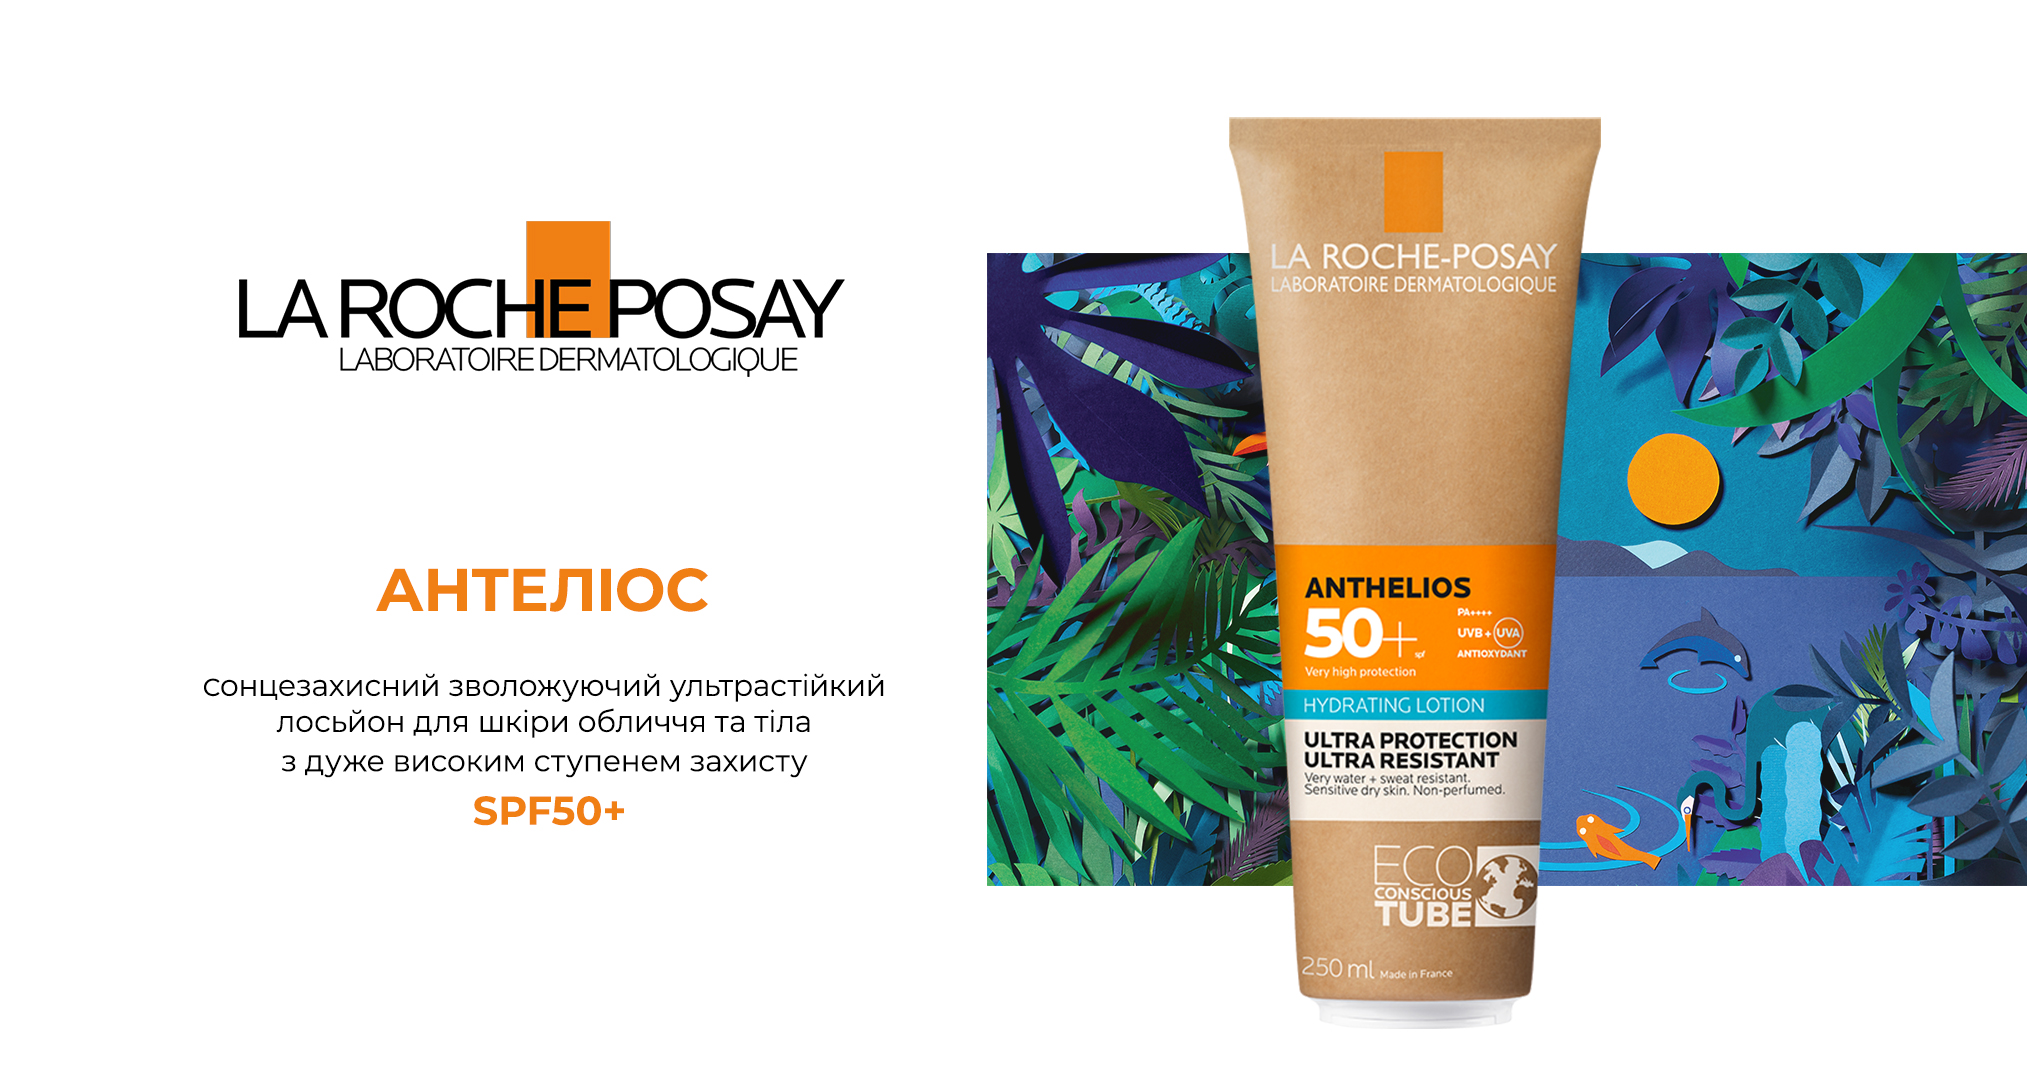 La Roche-Posay Anthelios Hydrating Lotion SPF50+